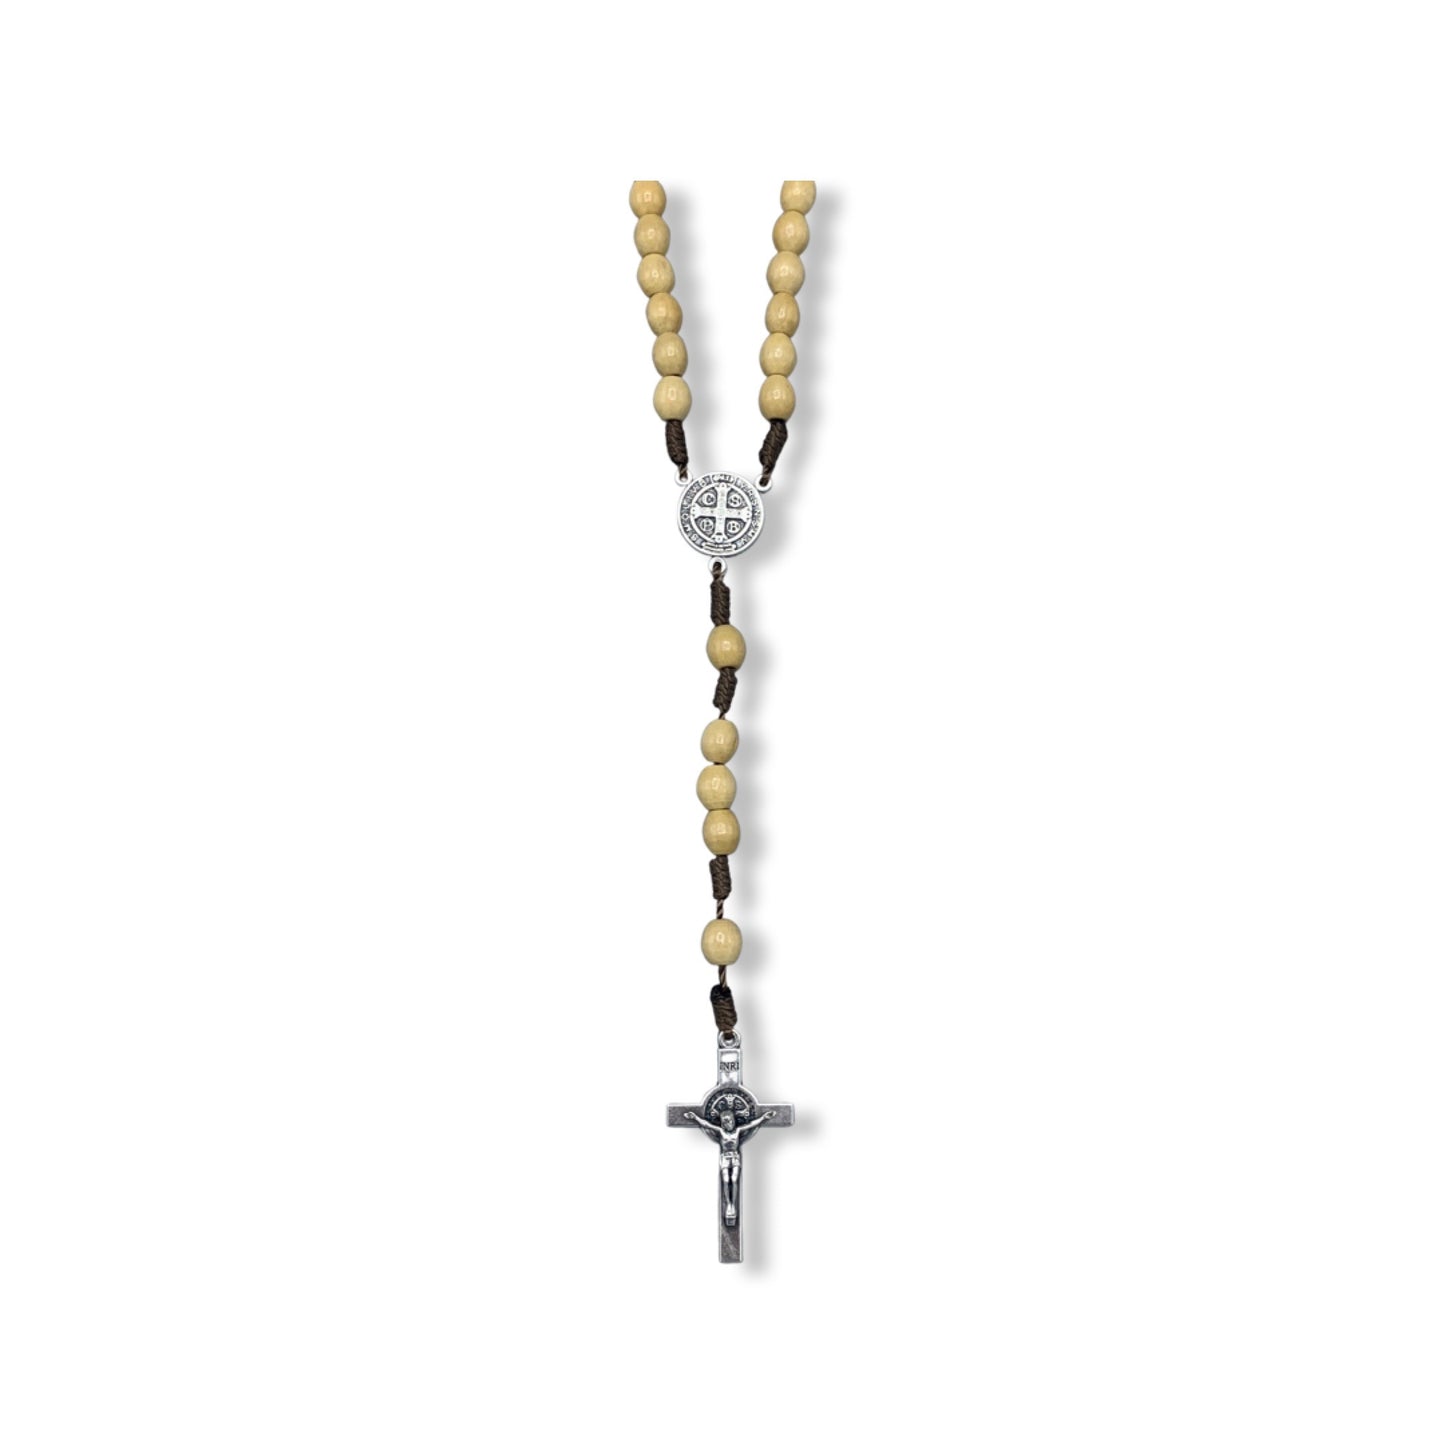 Wood Beads St. Benedict Rosary of Assorted Colors